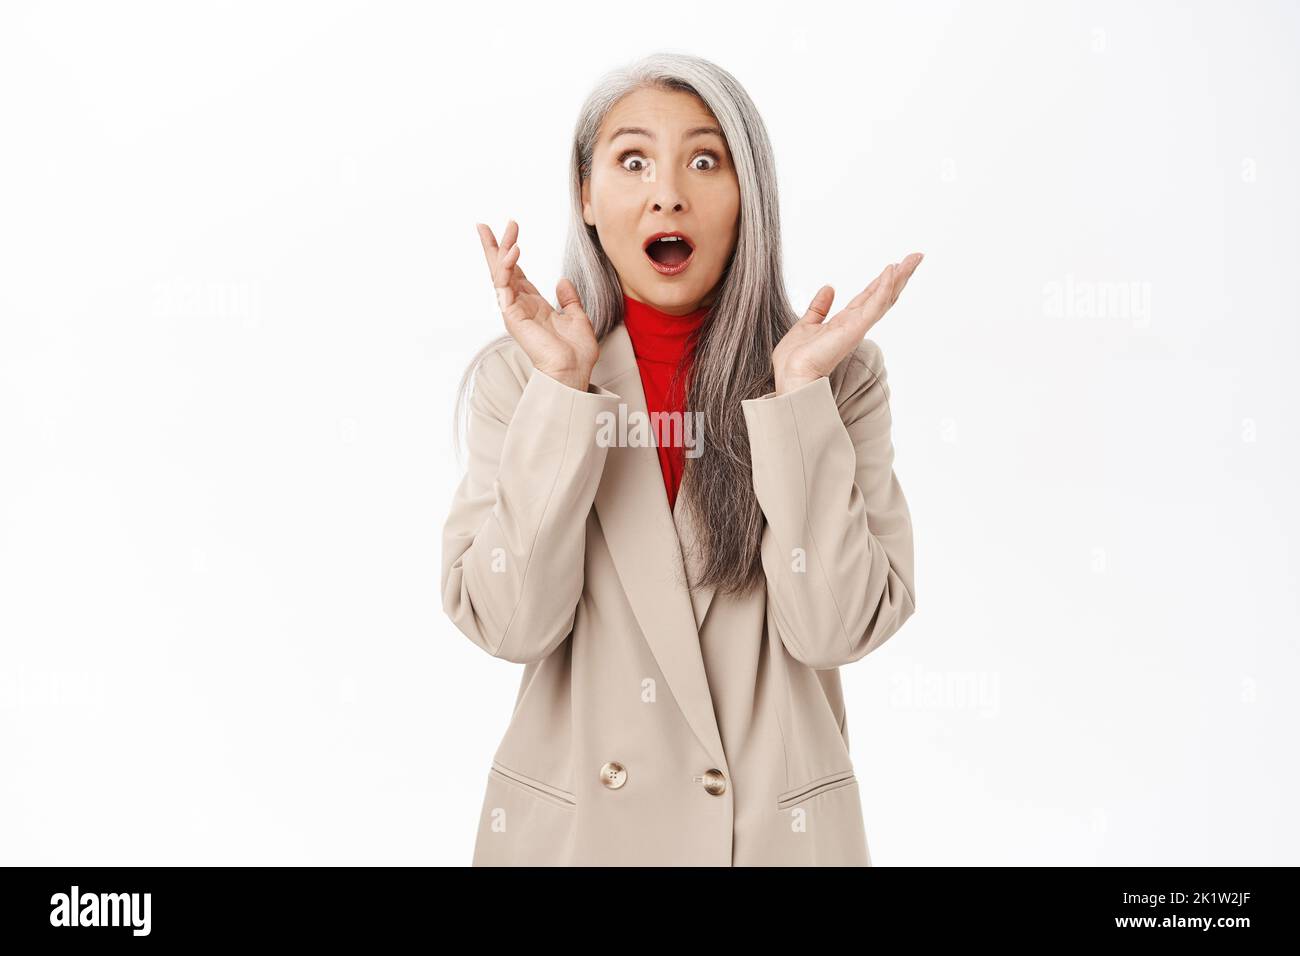 Portrait of asian businesswoman, senior lady looking amazed, surprised wow face, standing over white background. Copy space Stock Photo